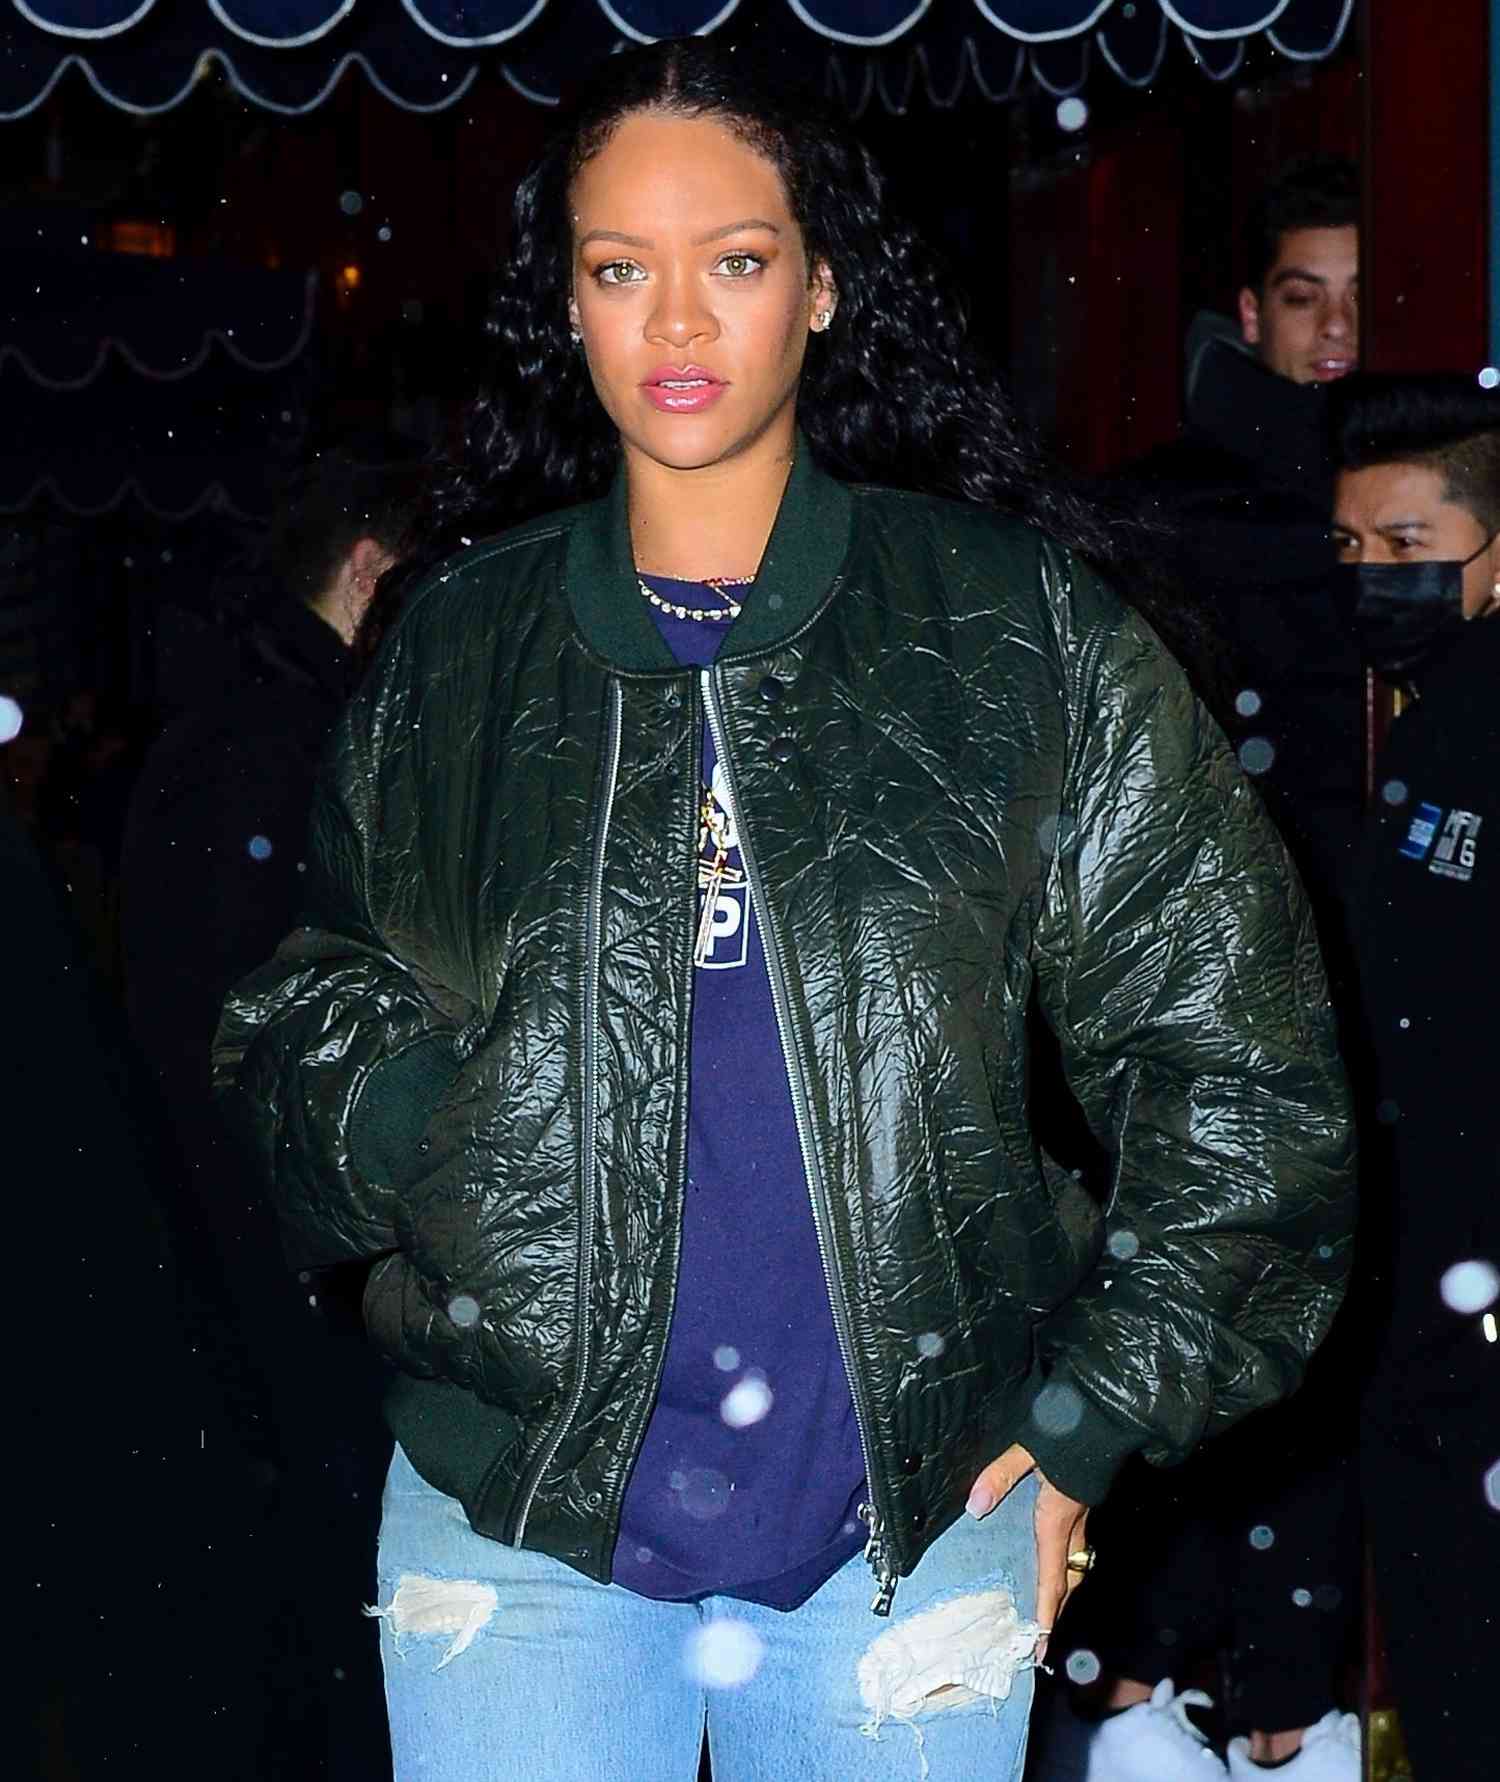 Rihanna stuns out in the snowy NYC weather to meet boyfriend ASAP Rocky